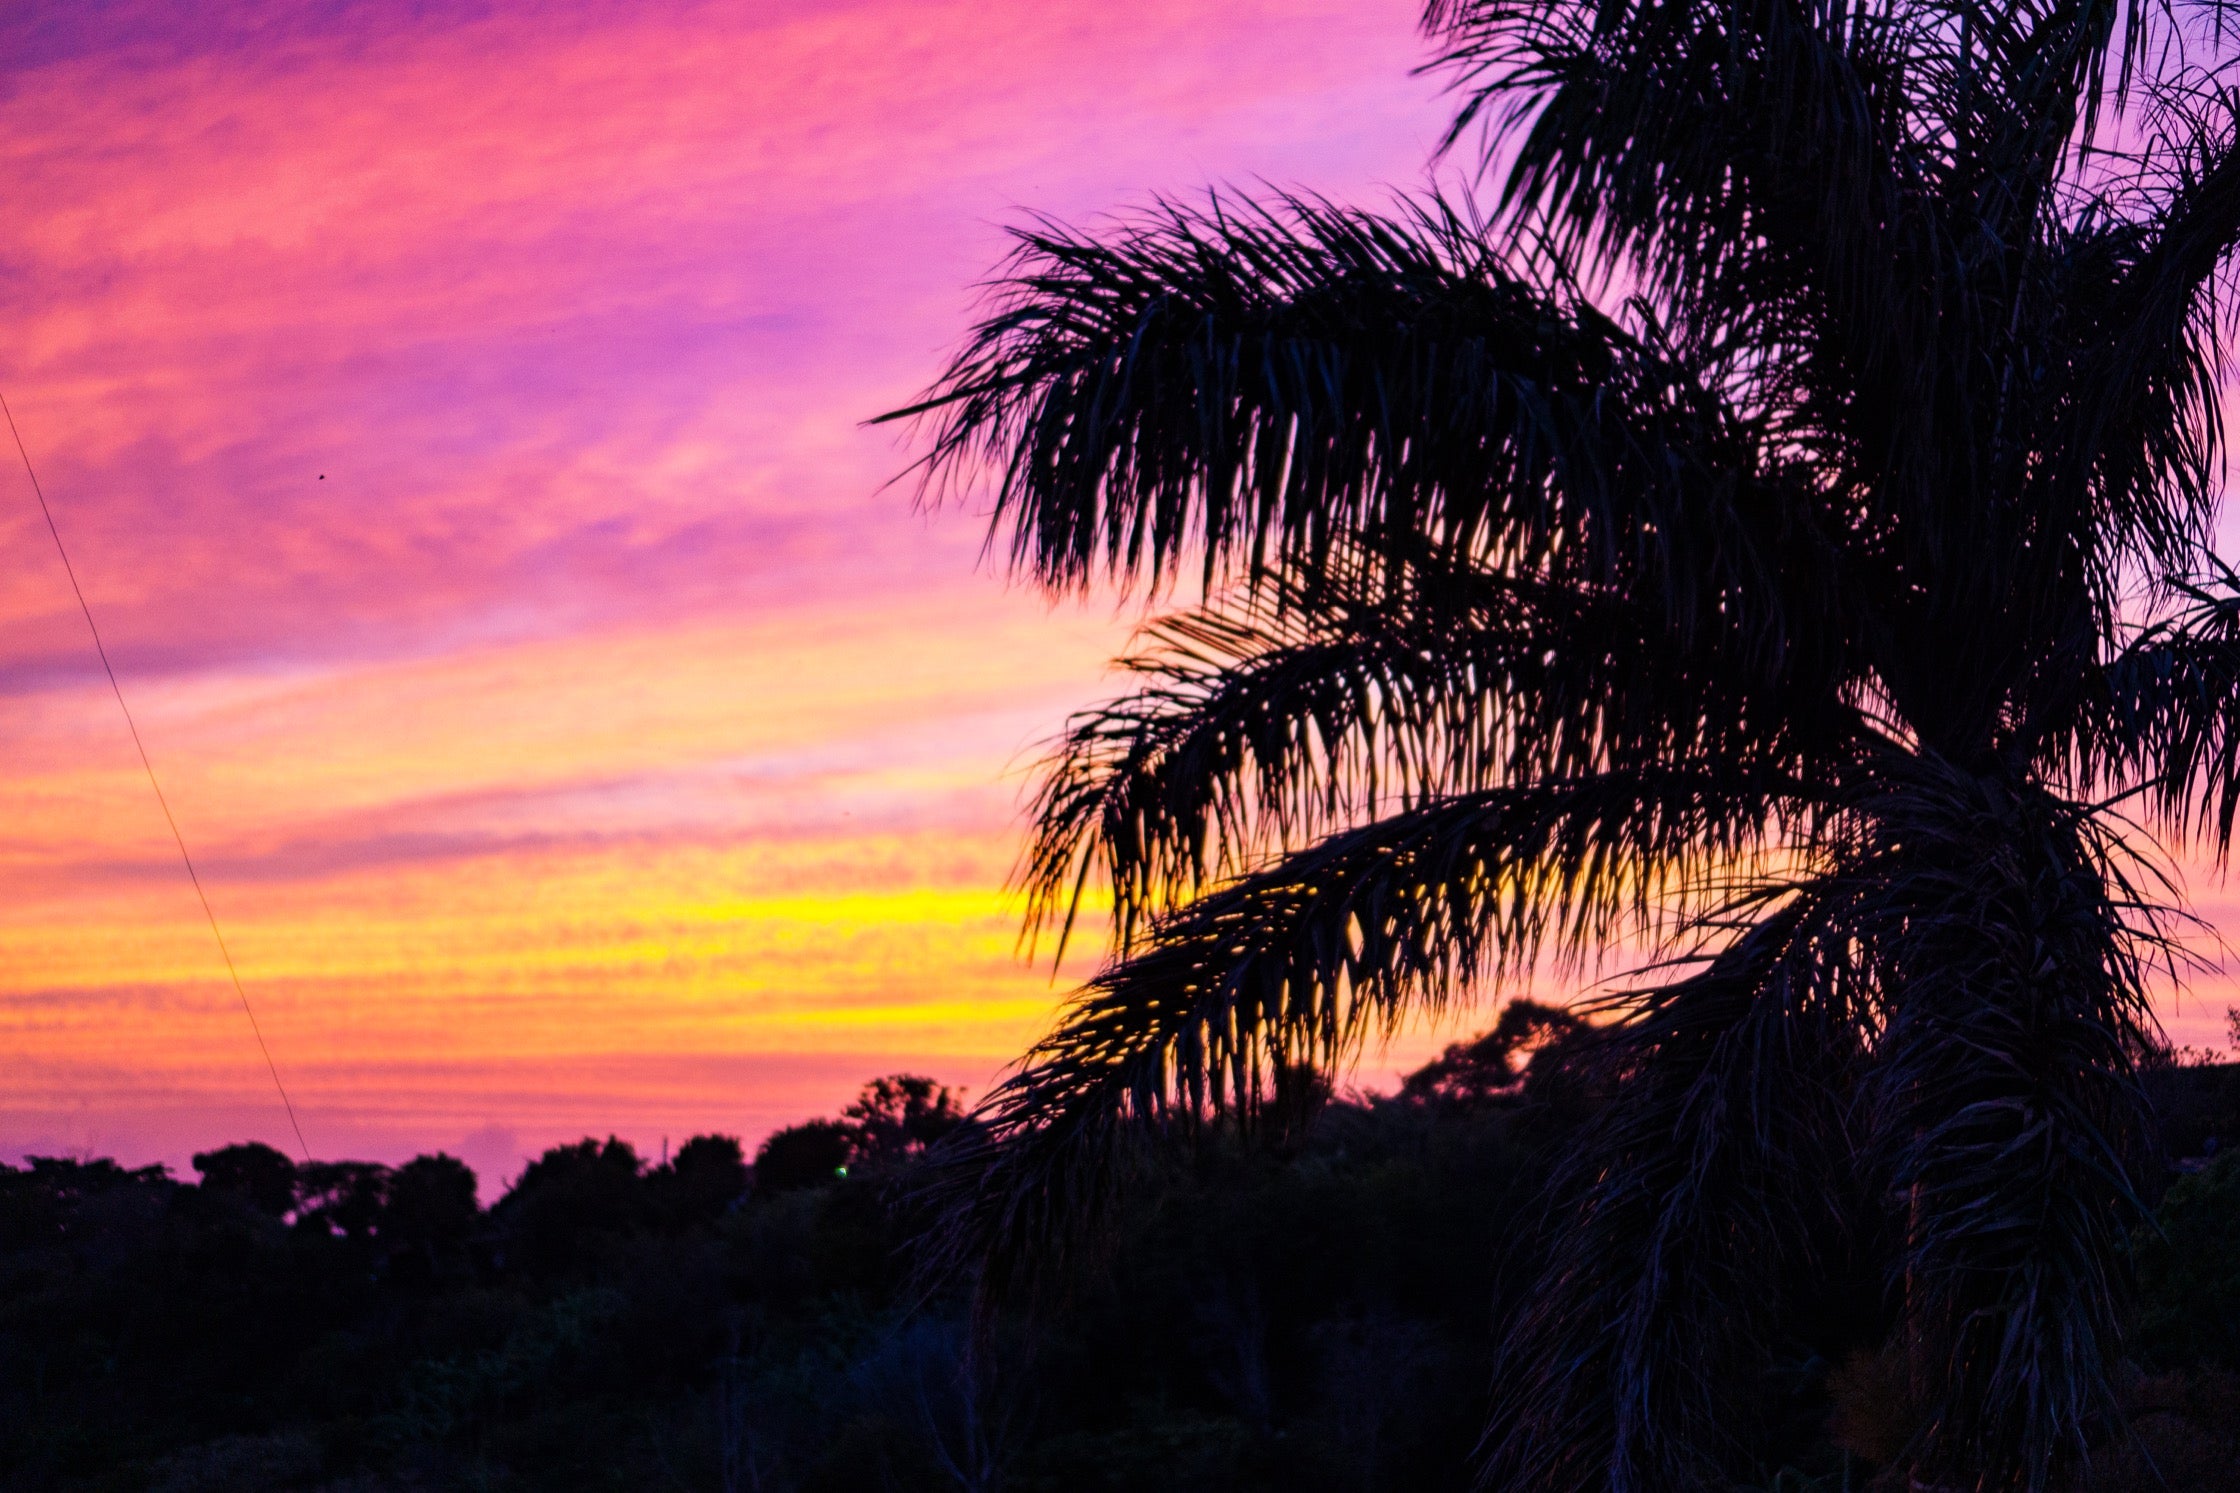 The sky at sunset and a palm tree in silhouette